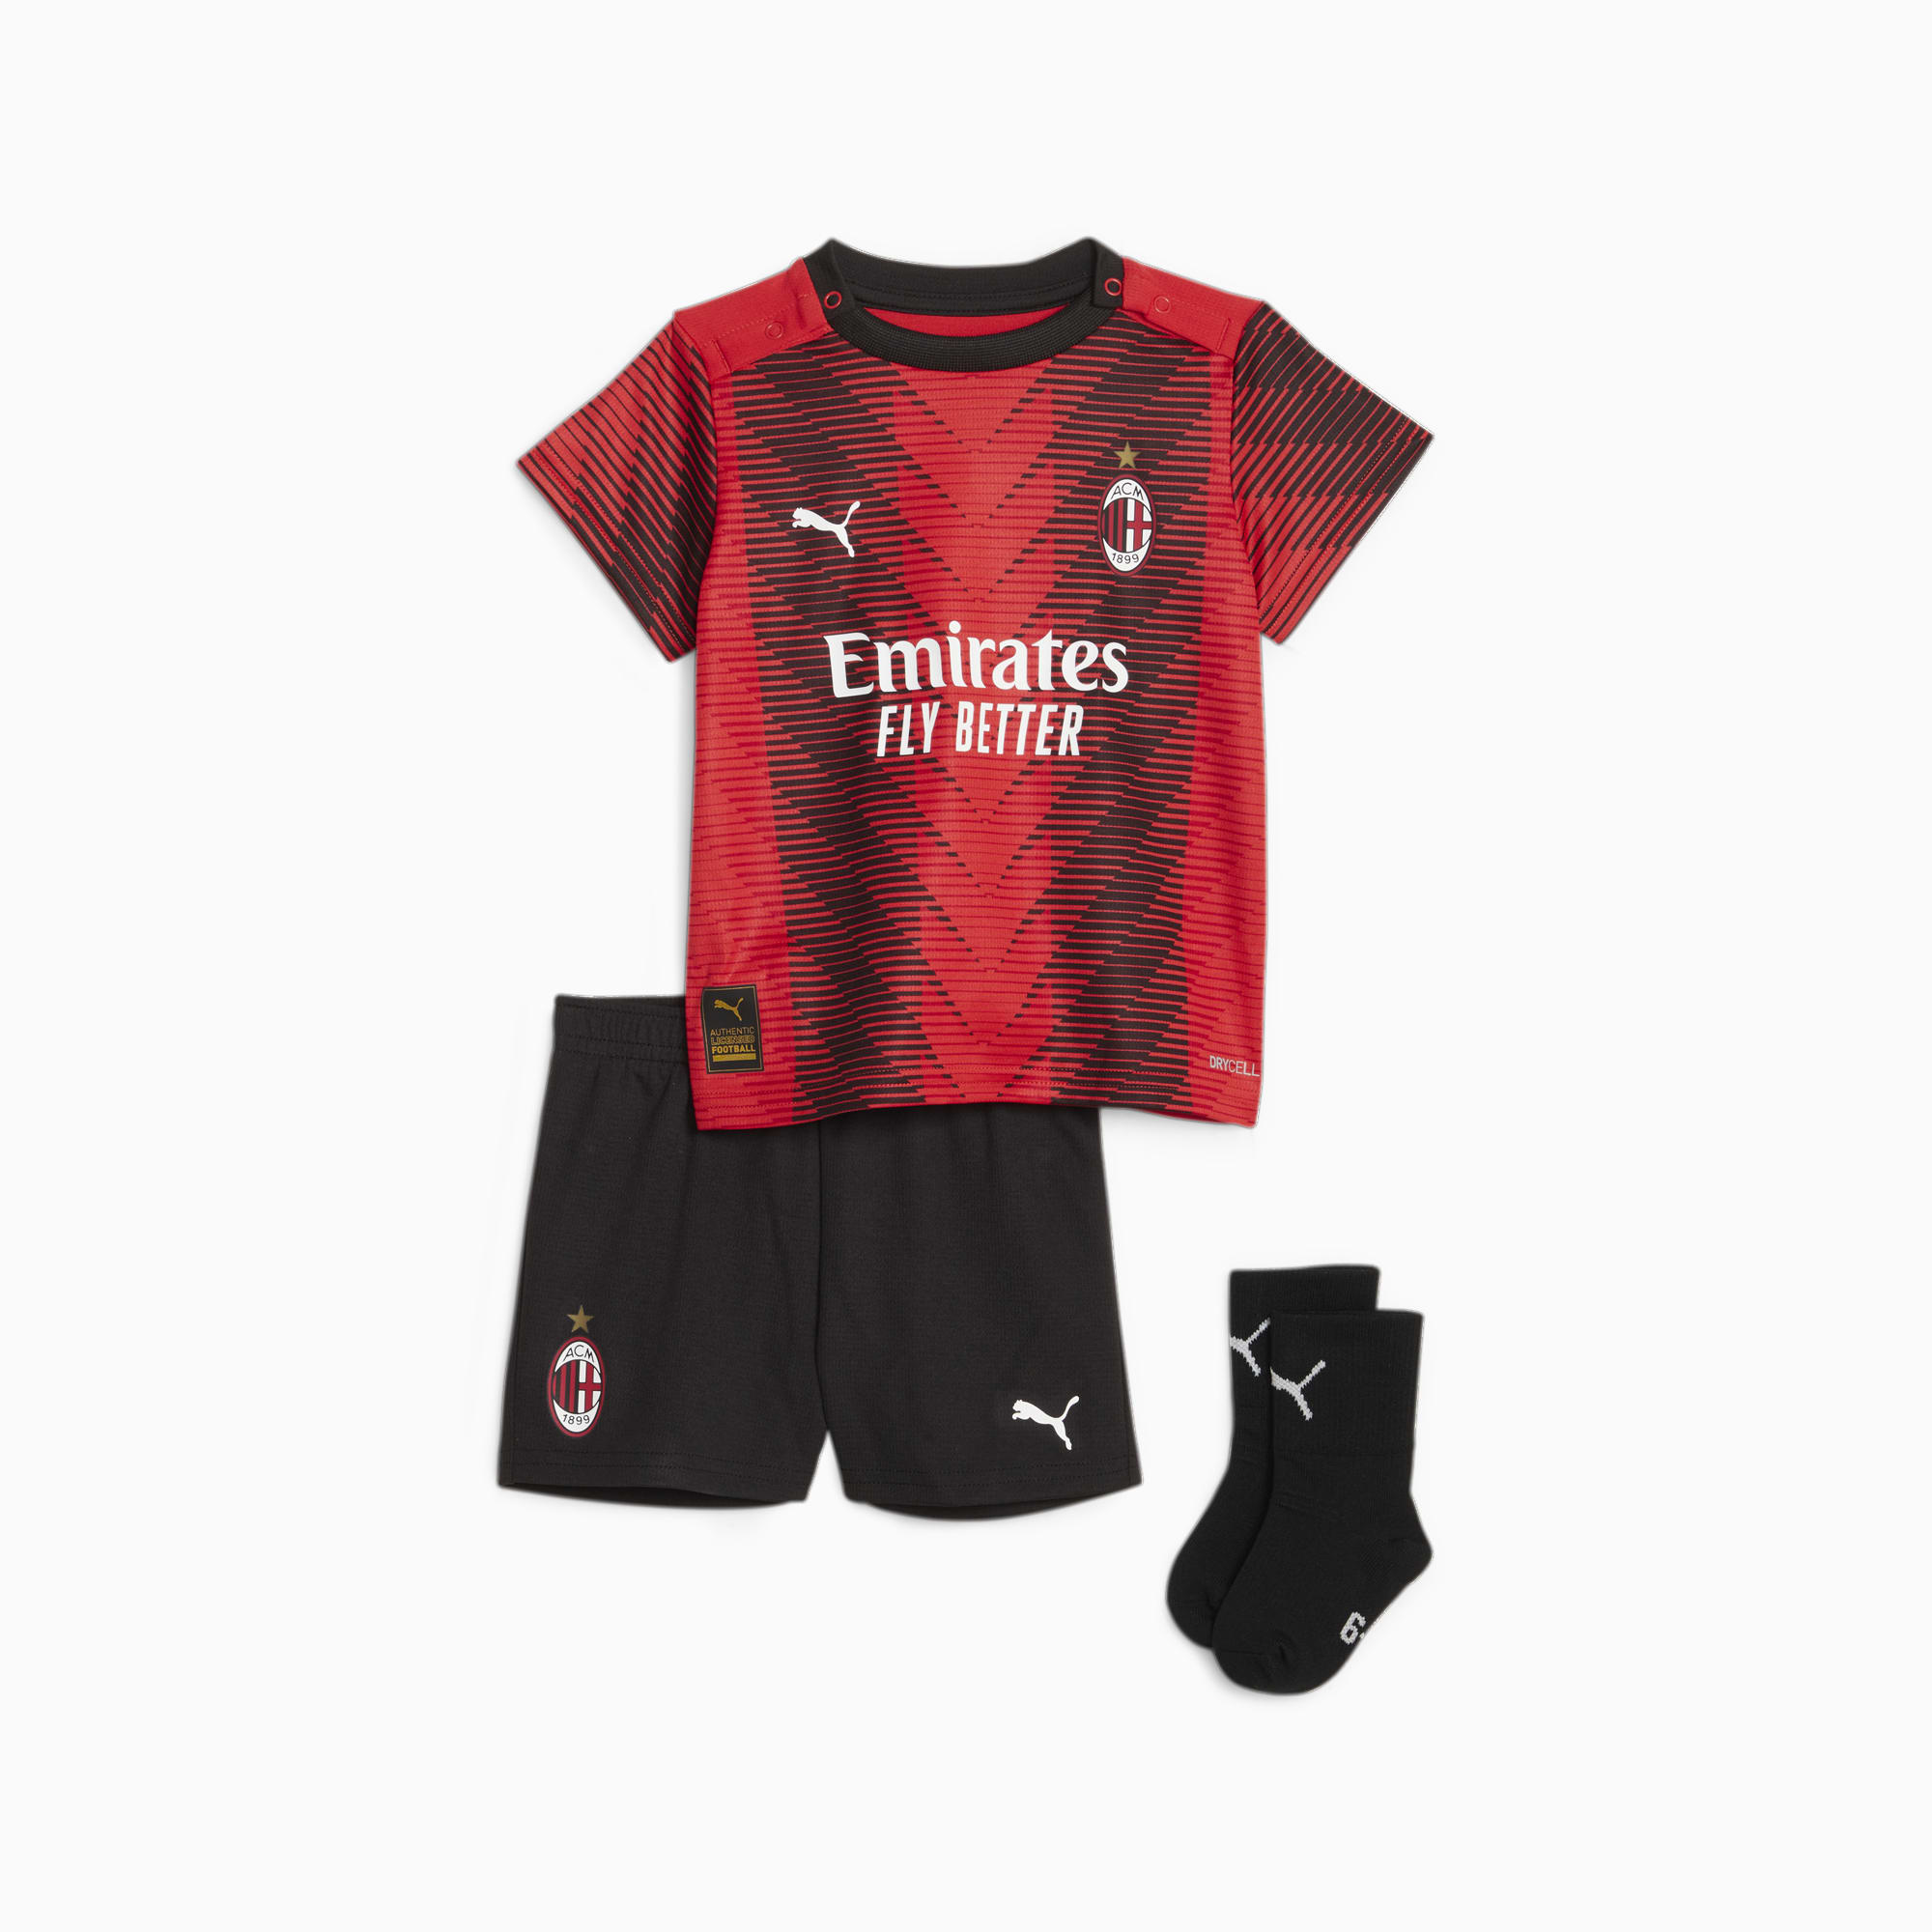 PUMA A.C. Milan 23/24 Home Baby Kit, For All Time Red/Black, Size 80, Clothing